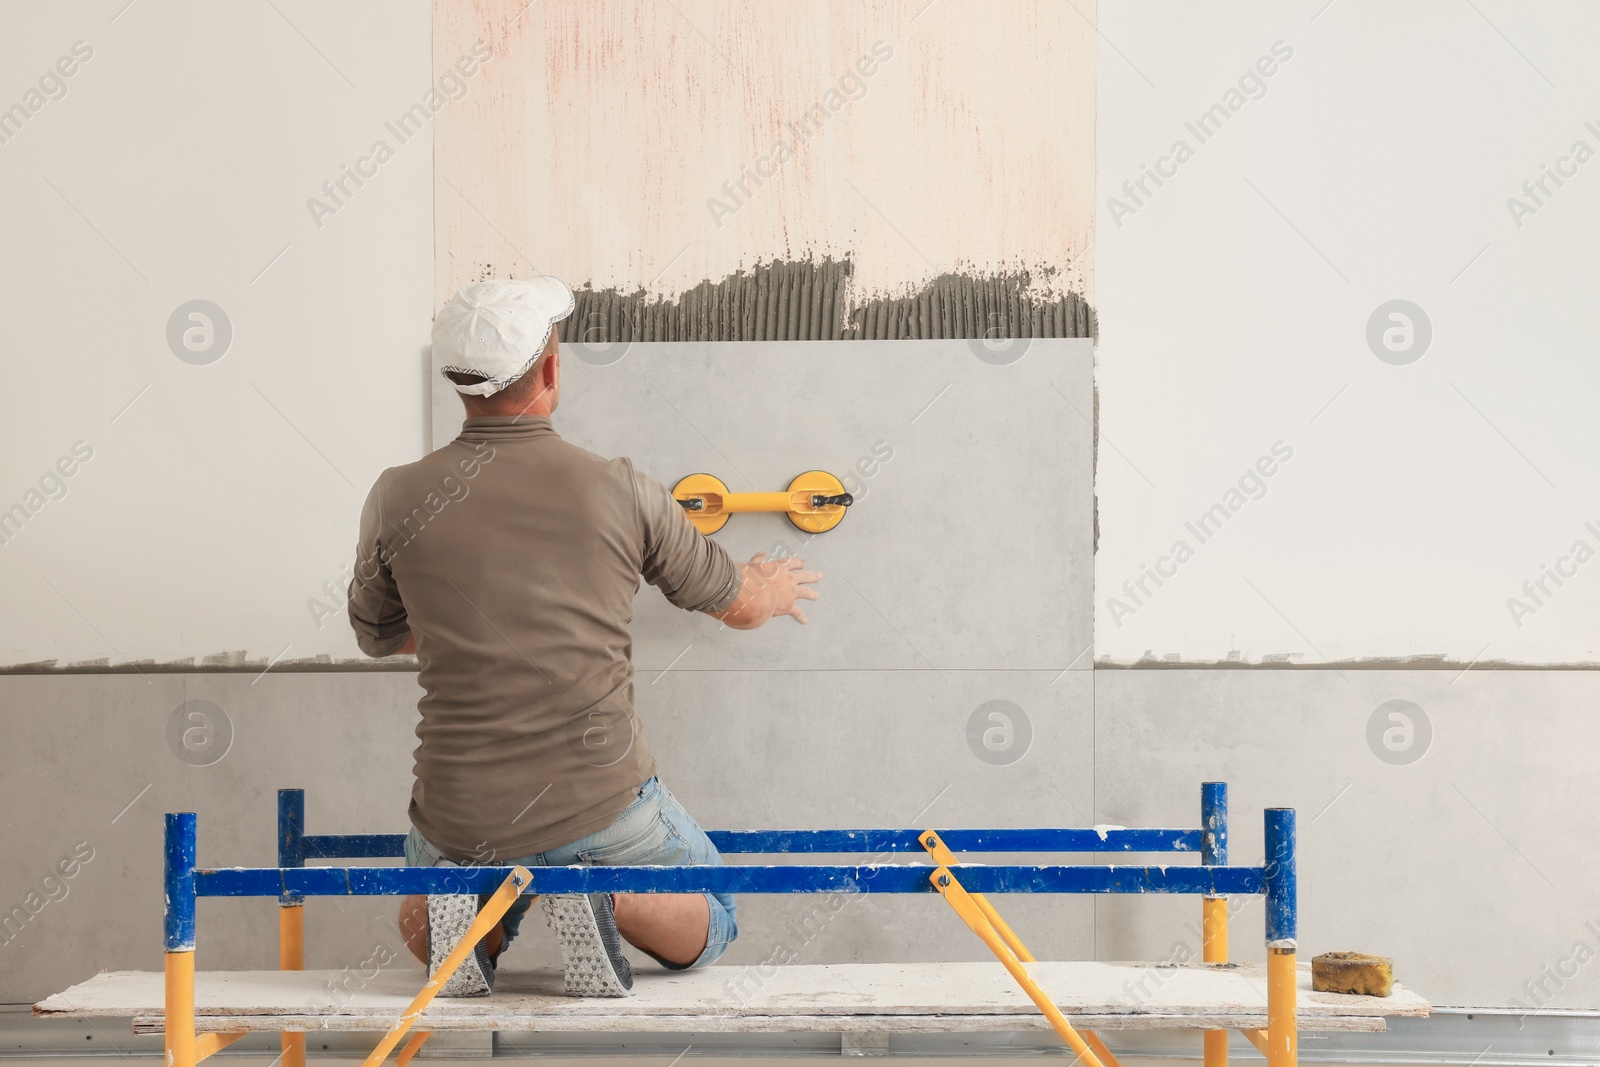 Photo of Worker installing tile on wall indoors, back view